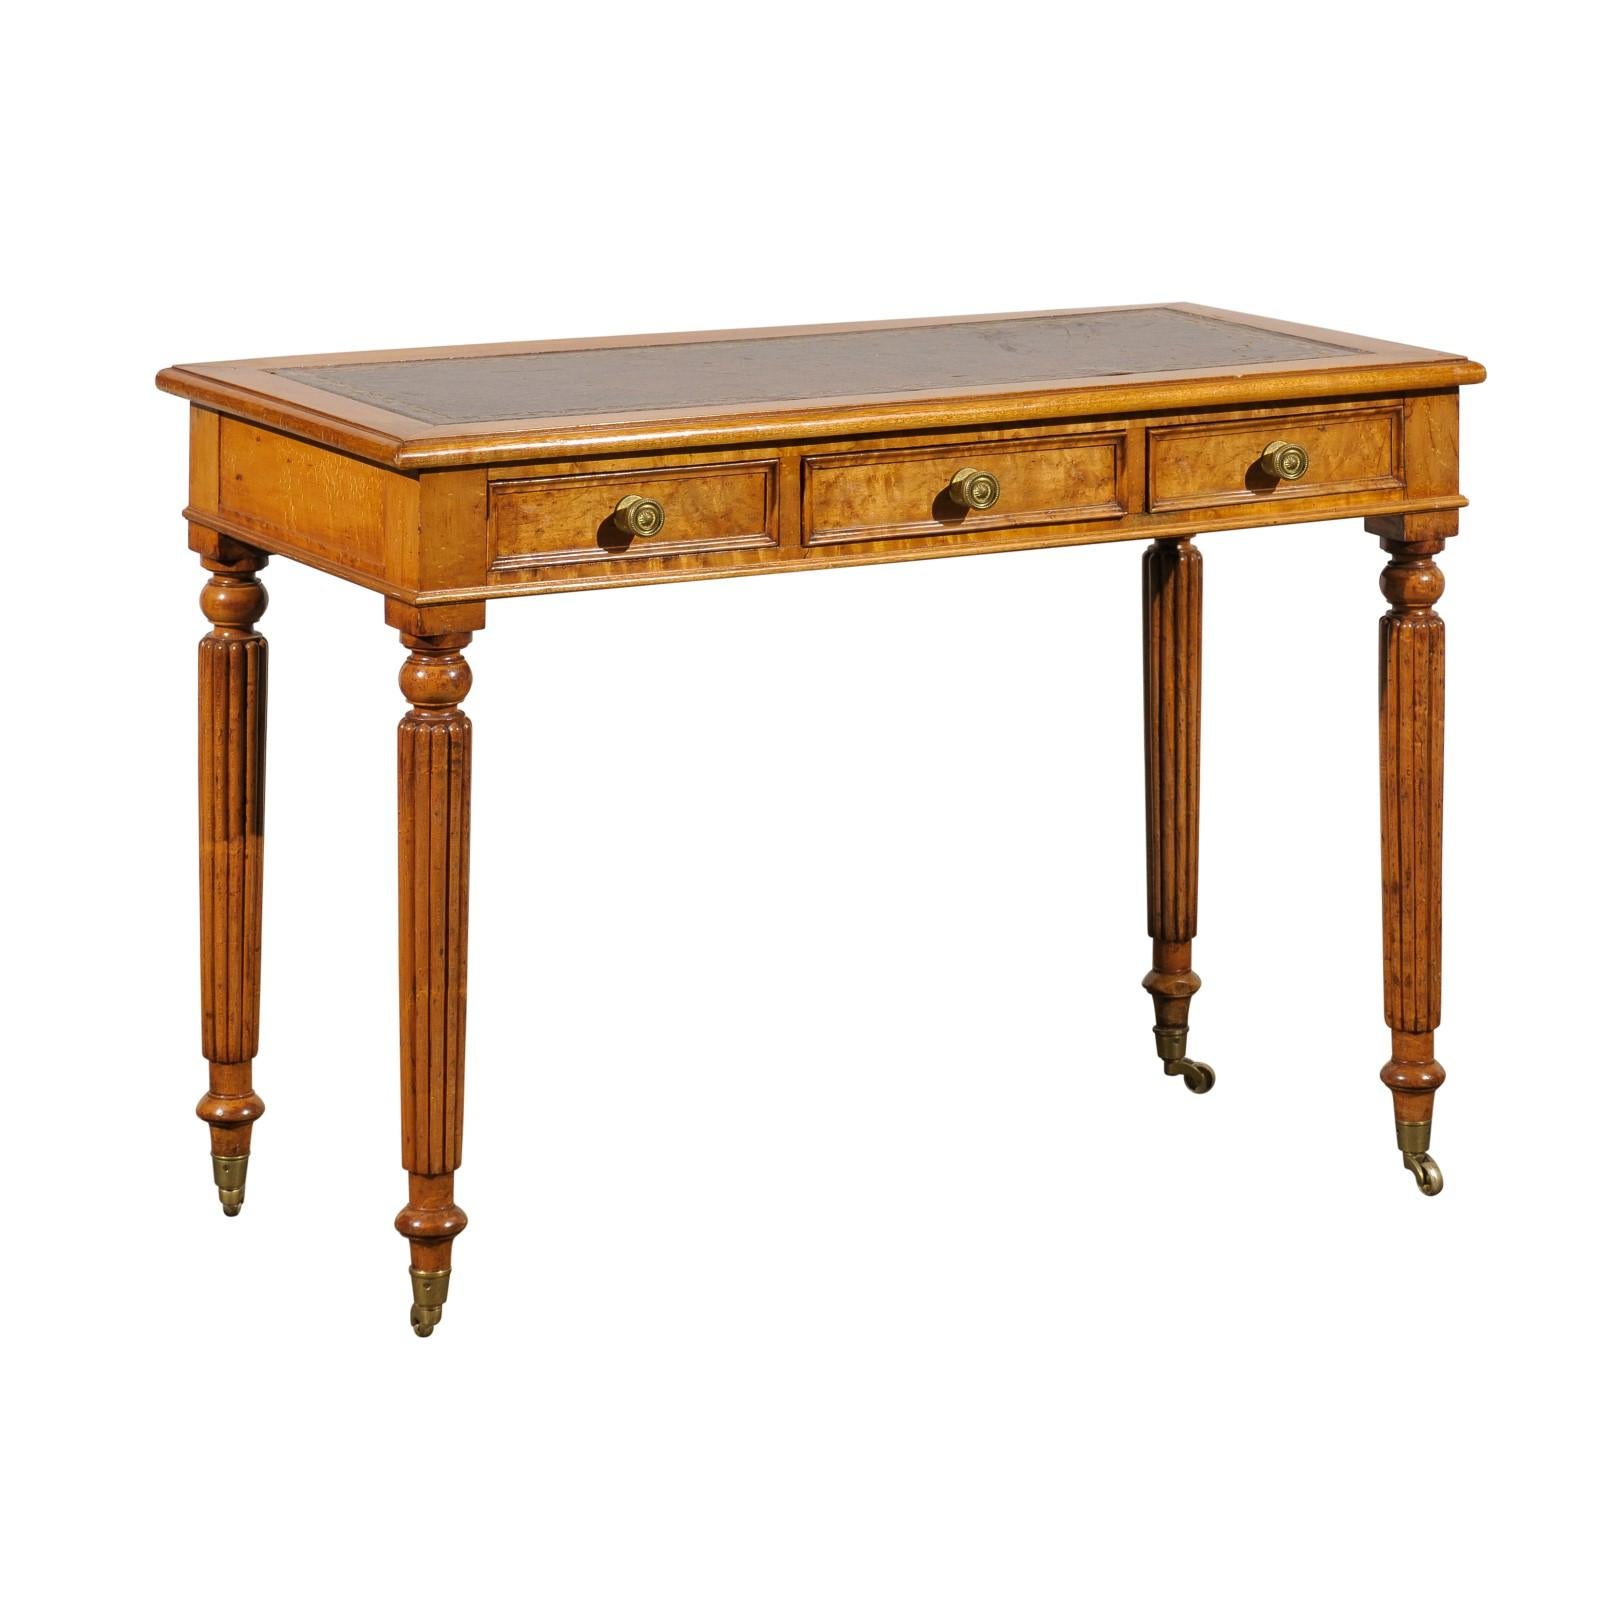 William IV Bird's-Eye Maple Writing Table Desk with Leather Top, circa 1840s